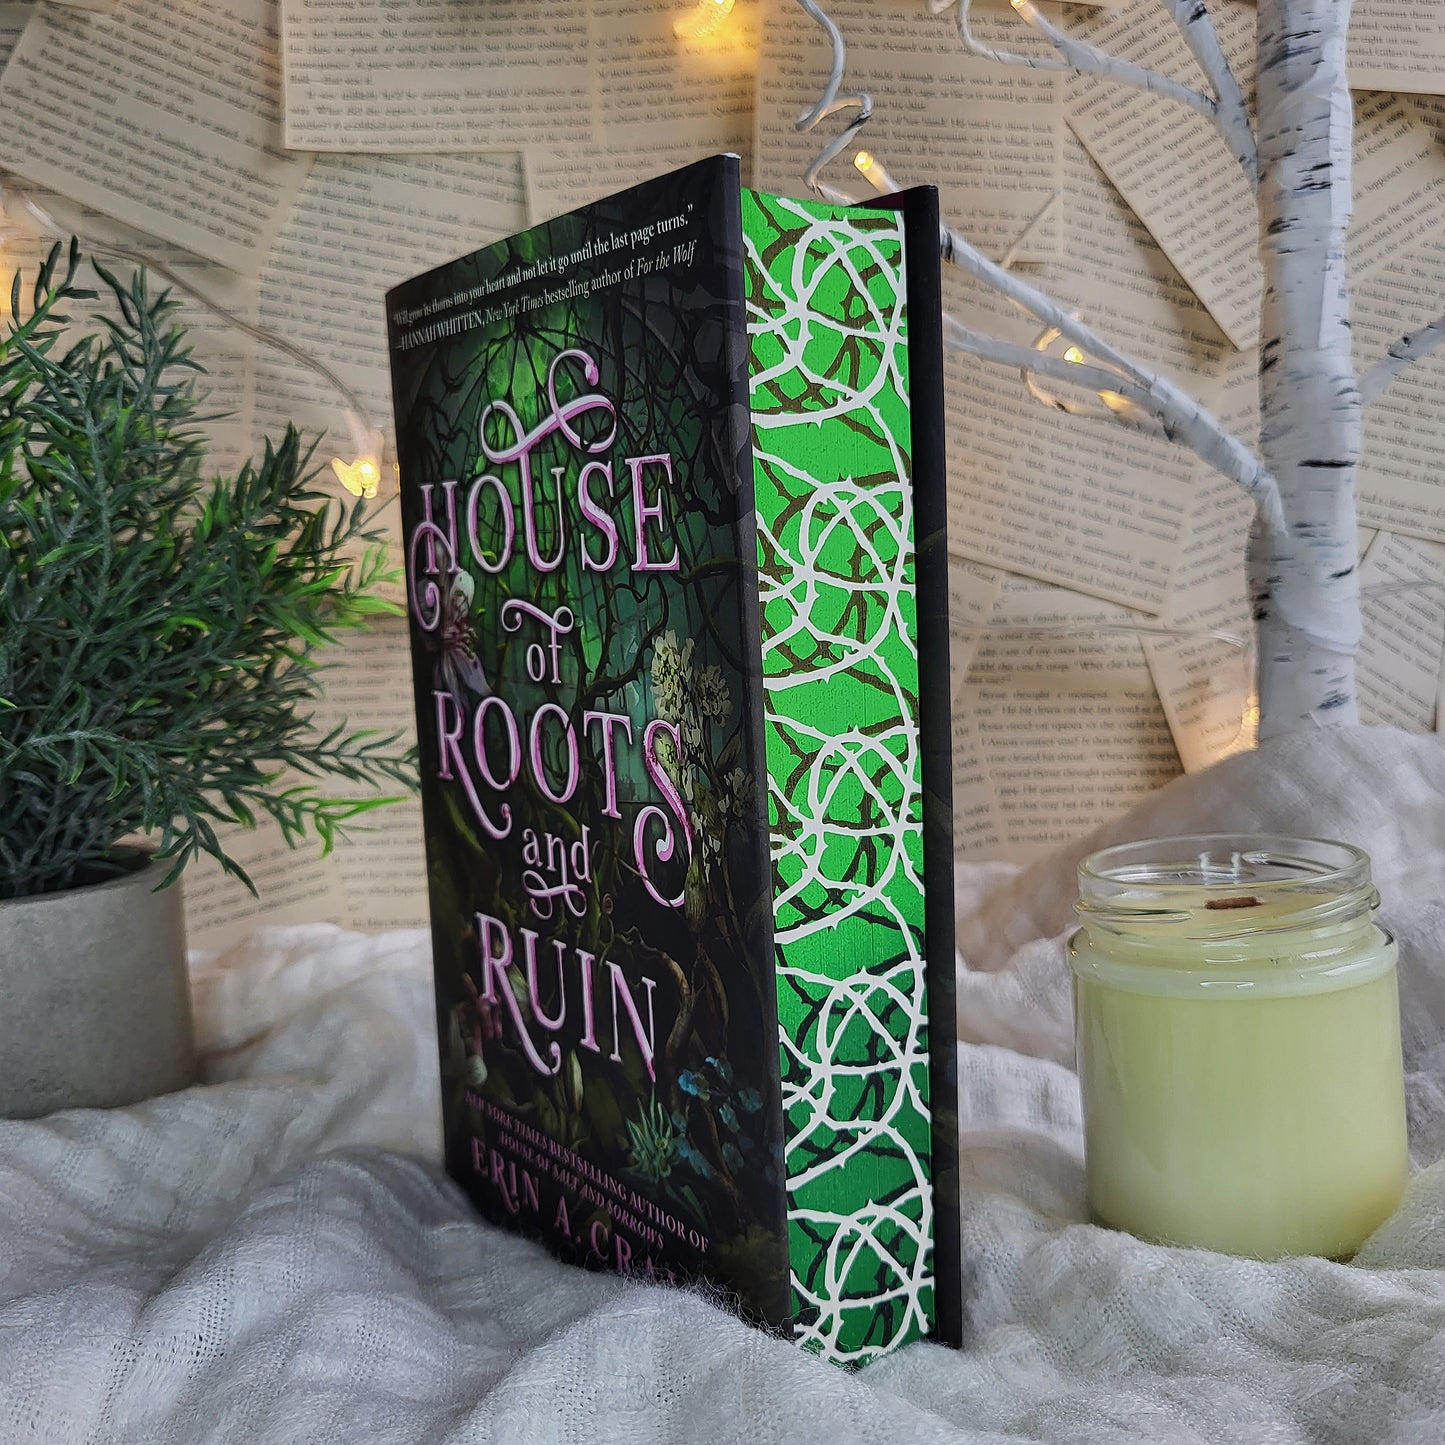 House of Salt and Sorrows/ House of Roots and Ruin